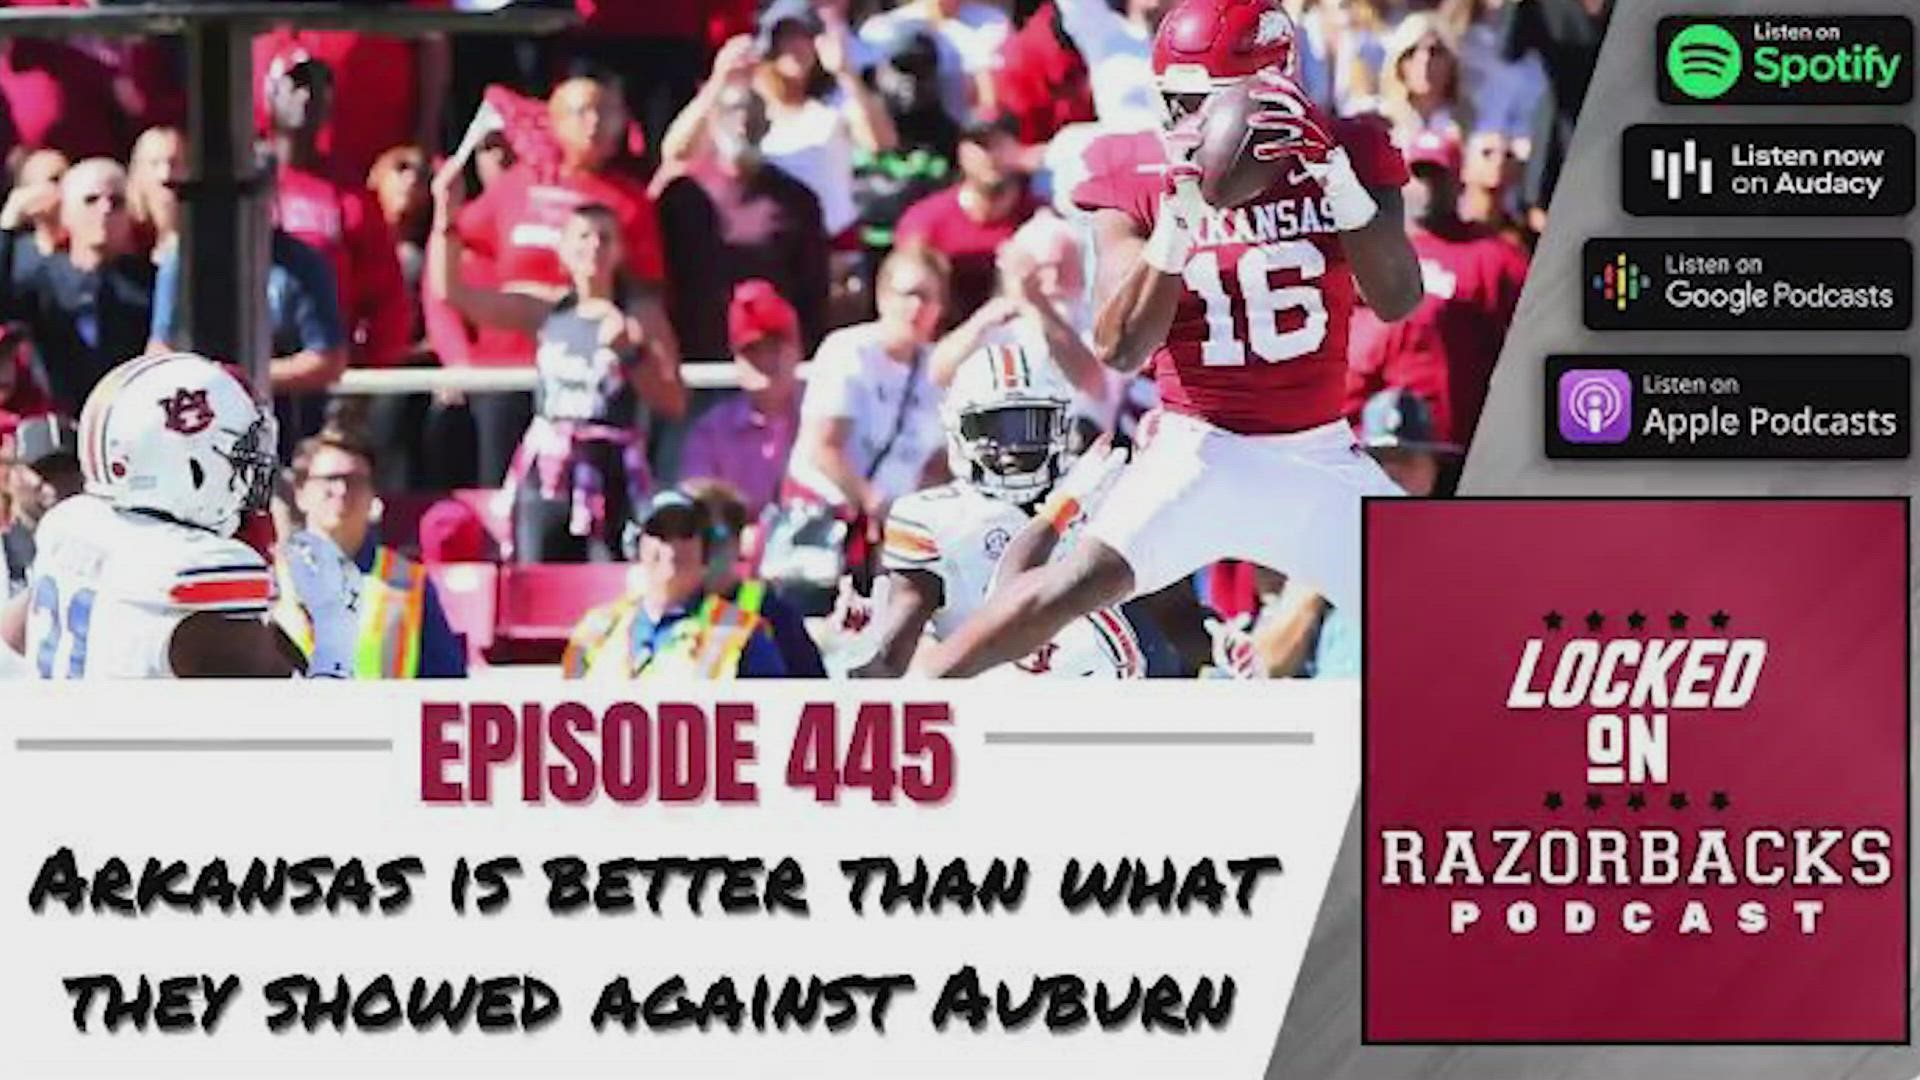 The Arkansas Razorbacks are better than what they showed against Auburn and SEC officiating has to be held more accountable for awful calls.